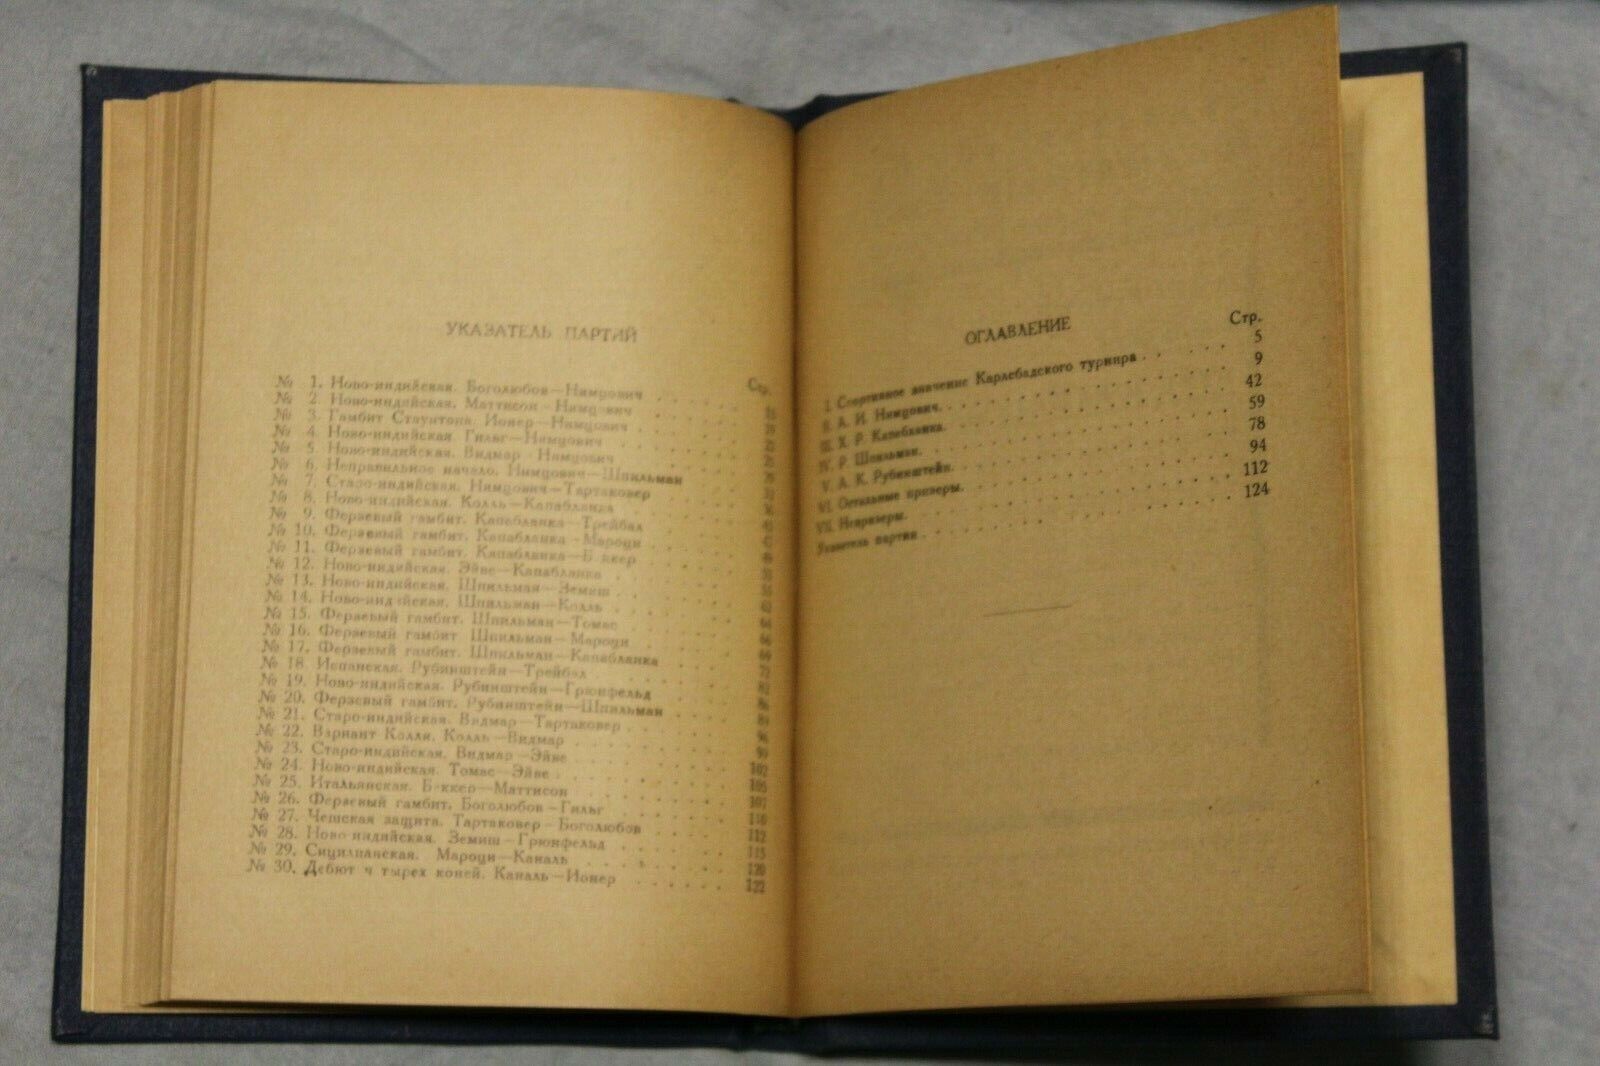 11009.Chess Book Nimtsovich. Selected games International tournament in Karlsbad 1929